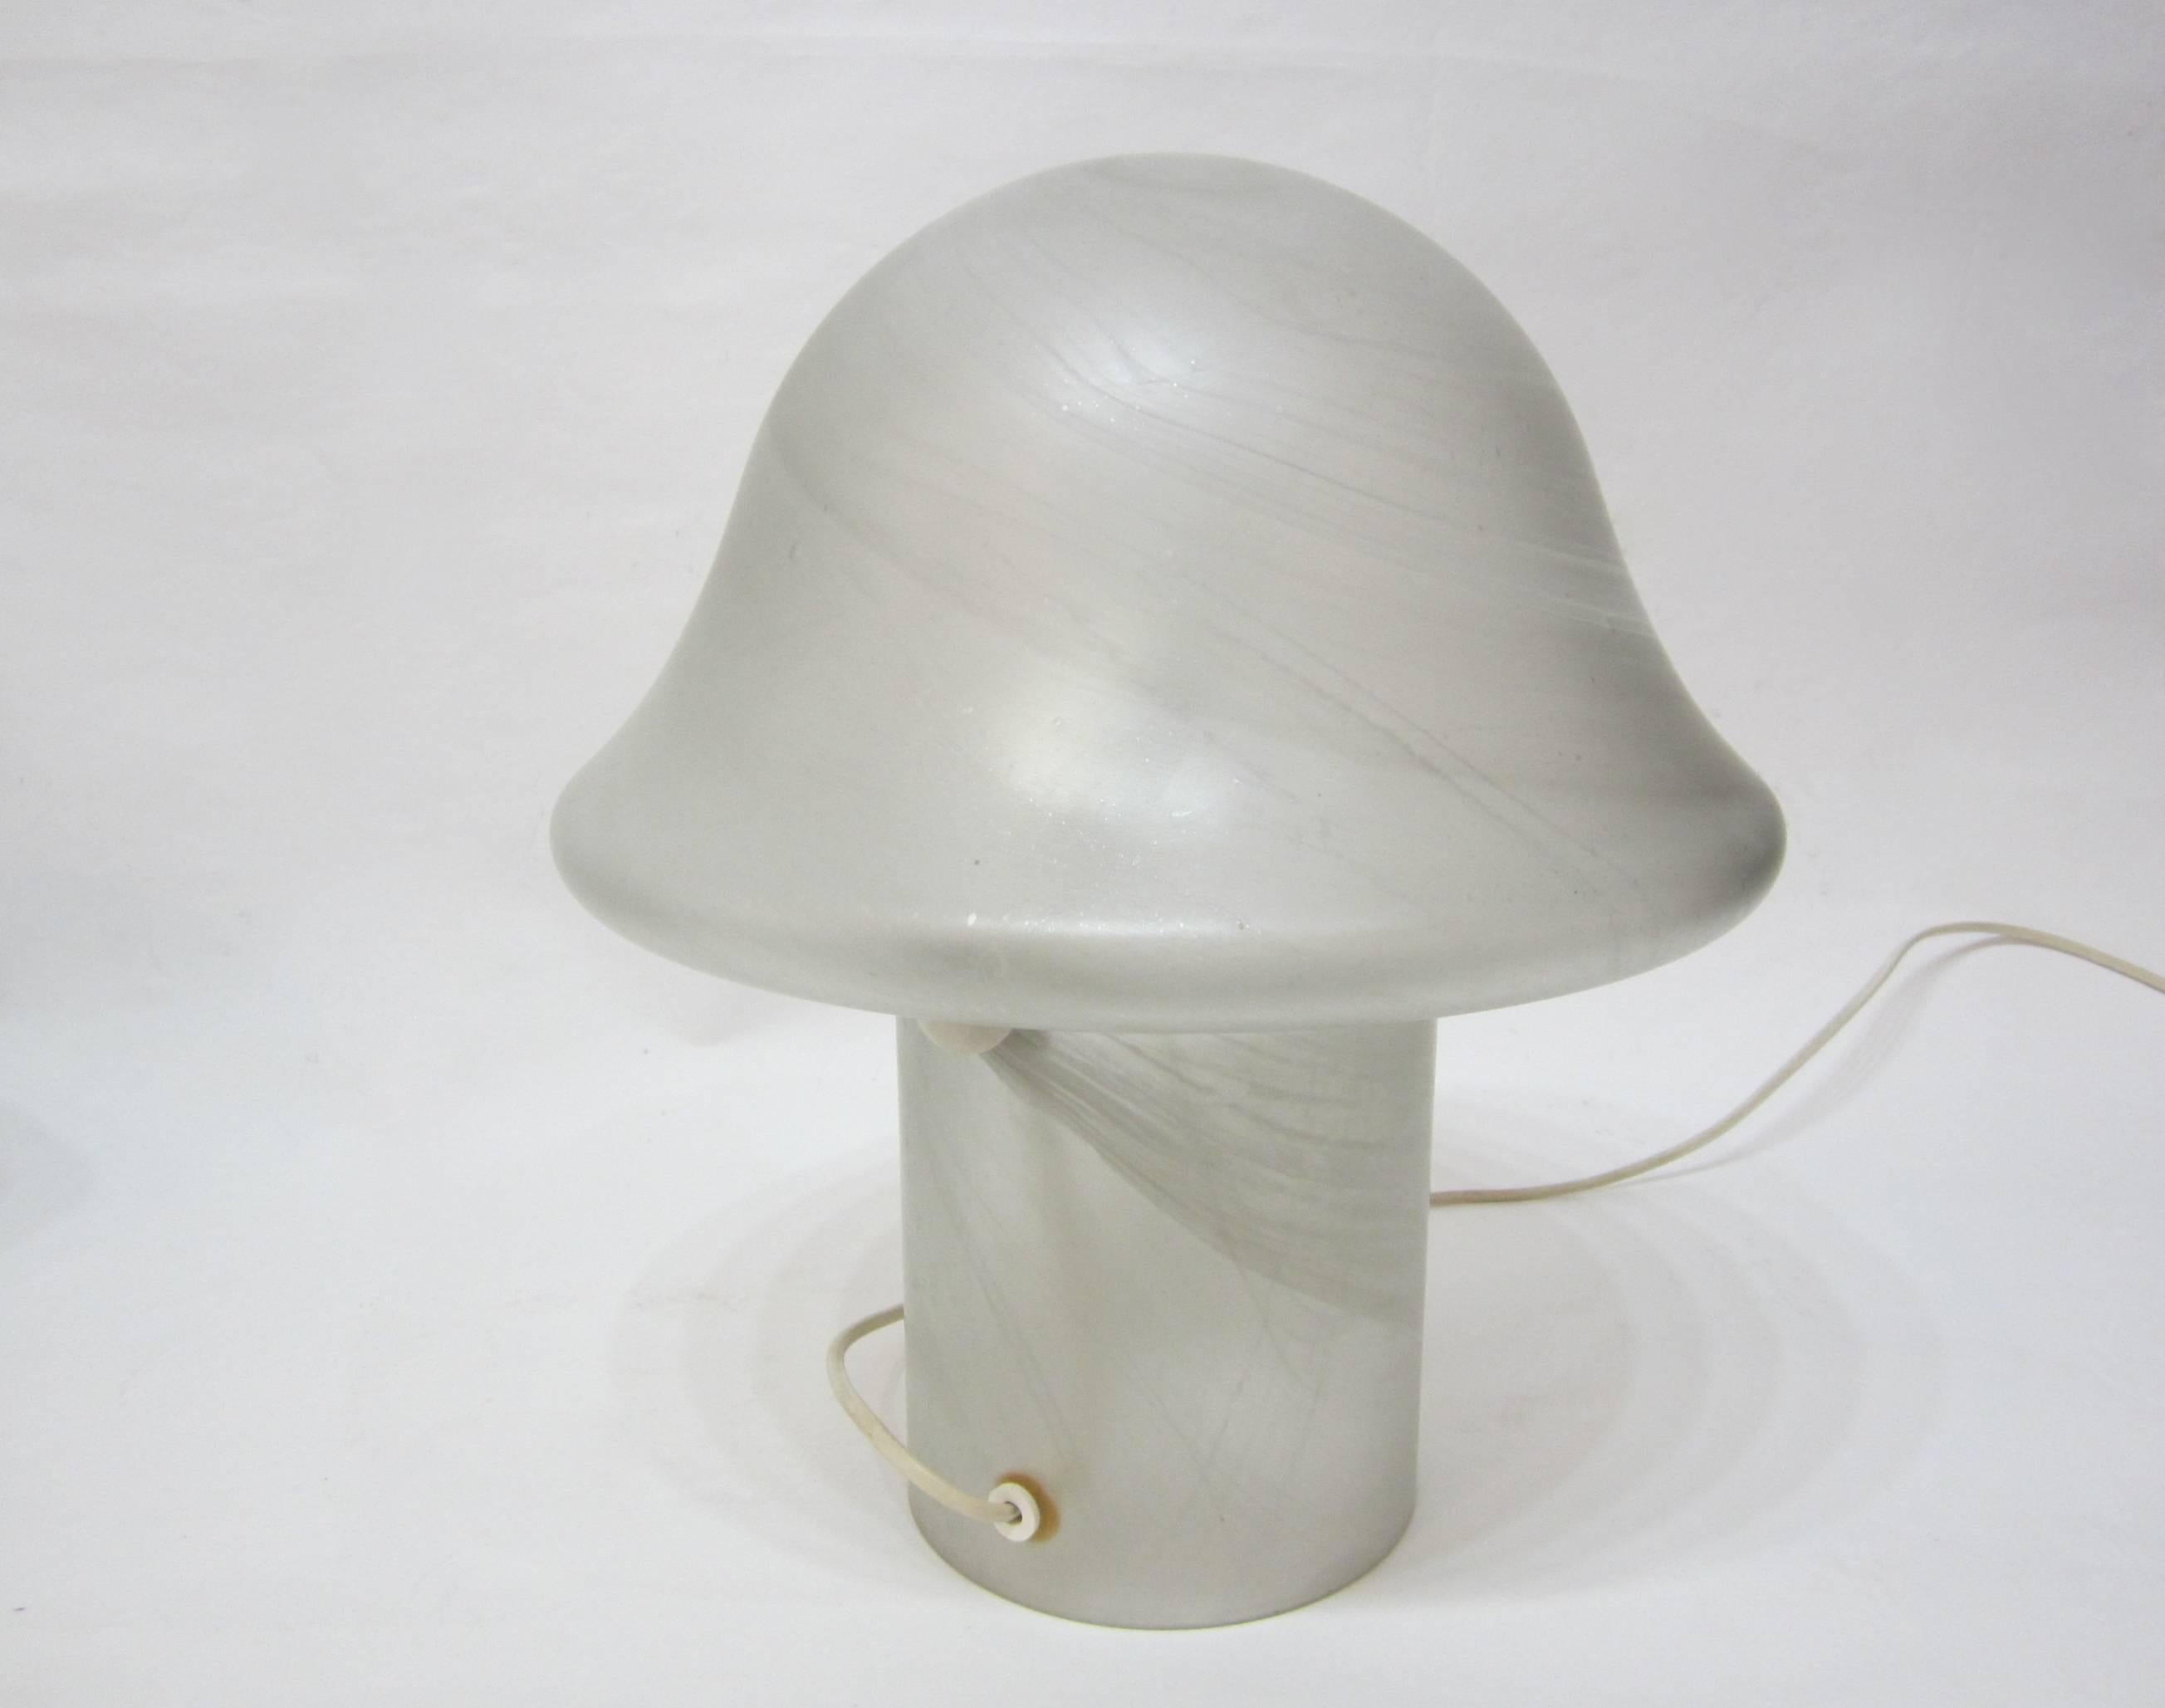 Beautifully executed lamp in one solid piece of frosted glass with pearlized swirl pattern resembling fiberglass. Original wiring and on-off switch and European plug. Signed.